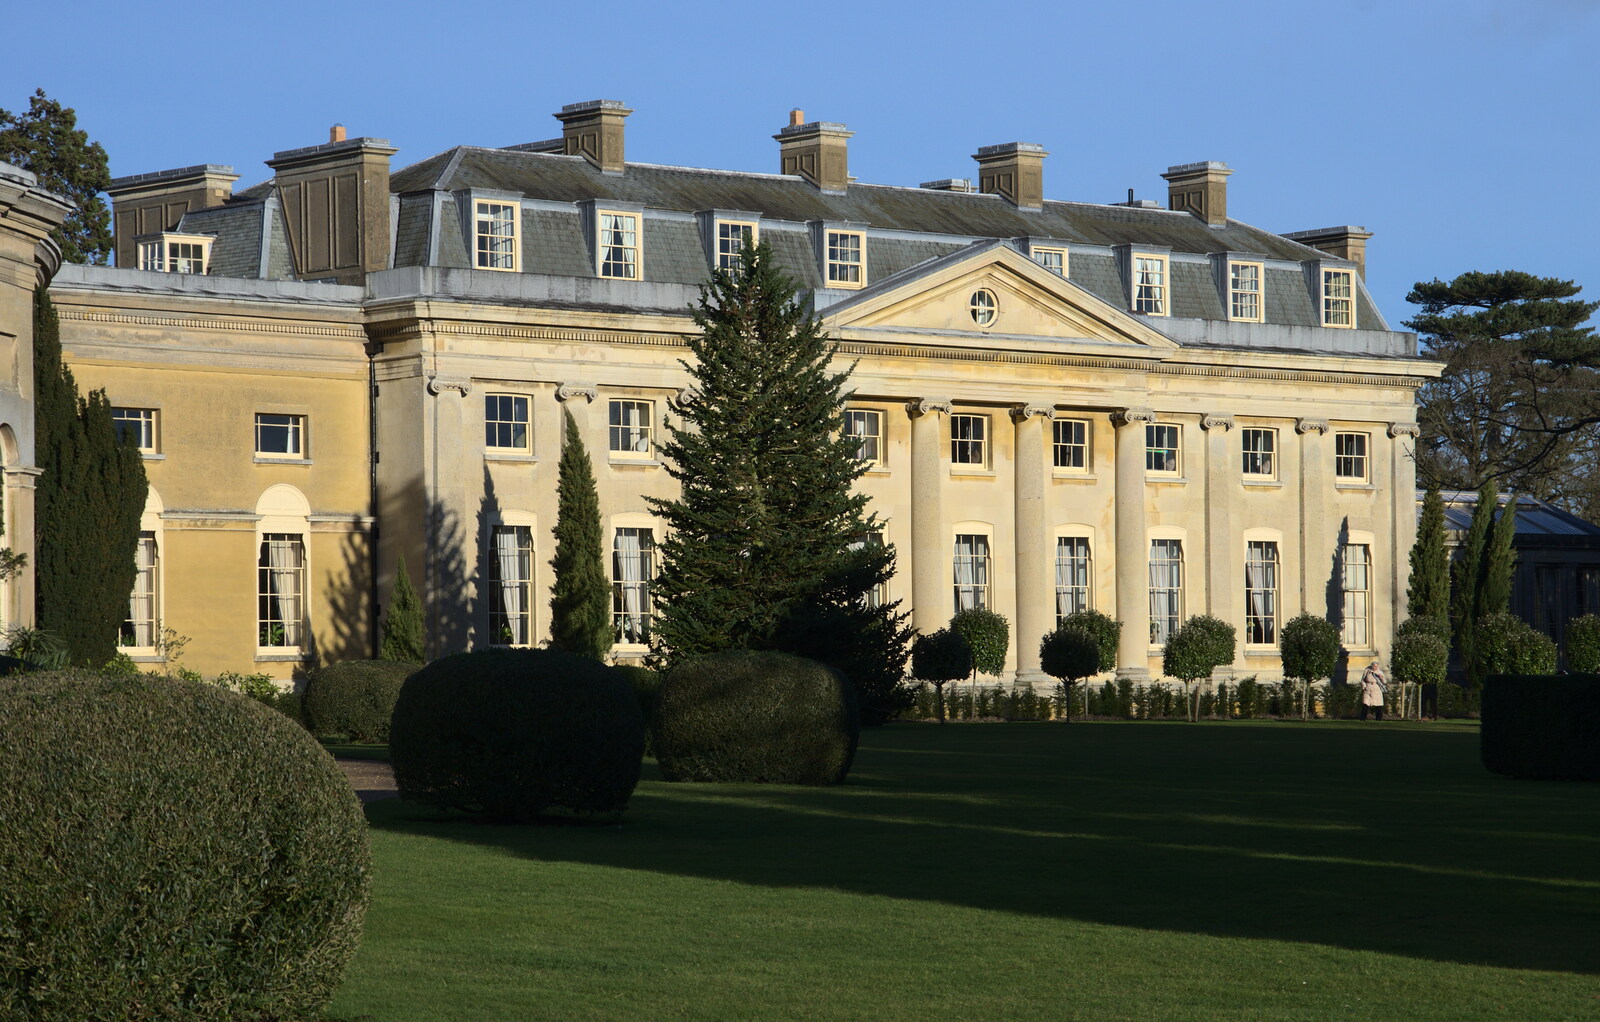 The south wing is now a hotel from Life Below Stairs, Ickworth House, Horringer, Suffolk - 28th January 2018